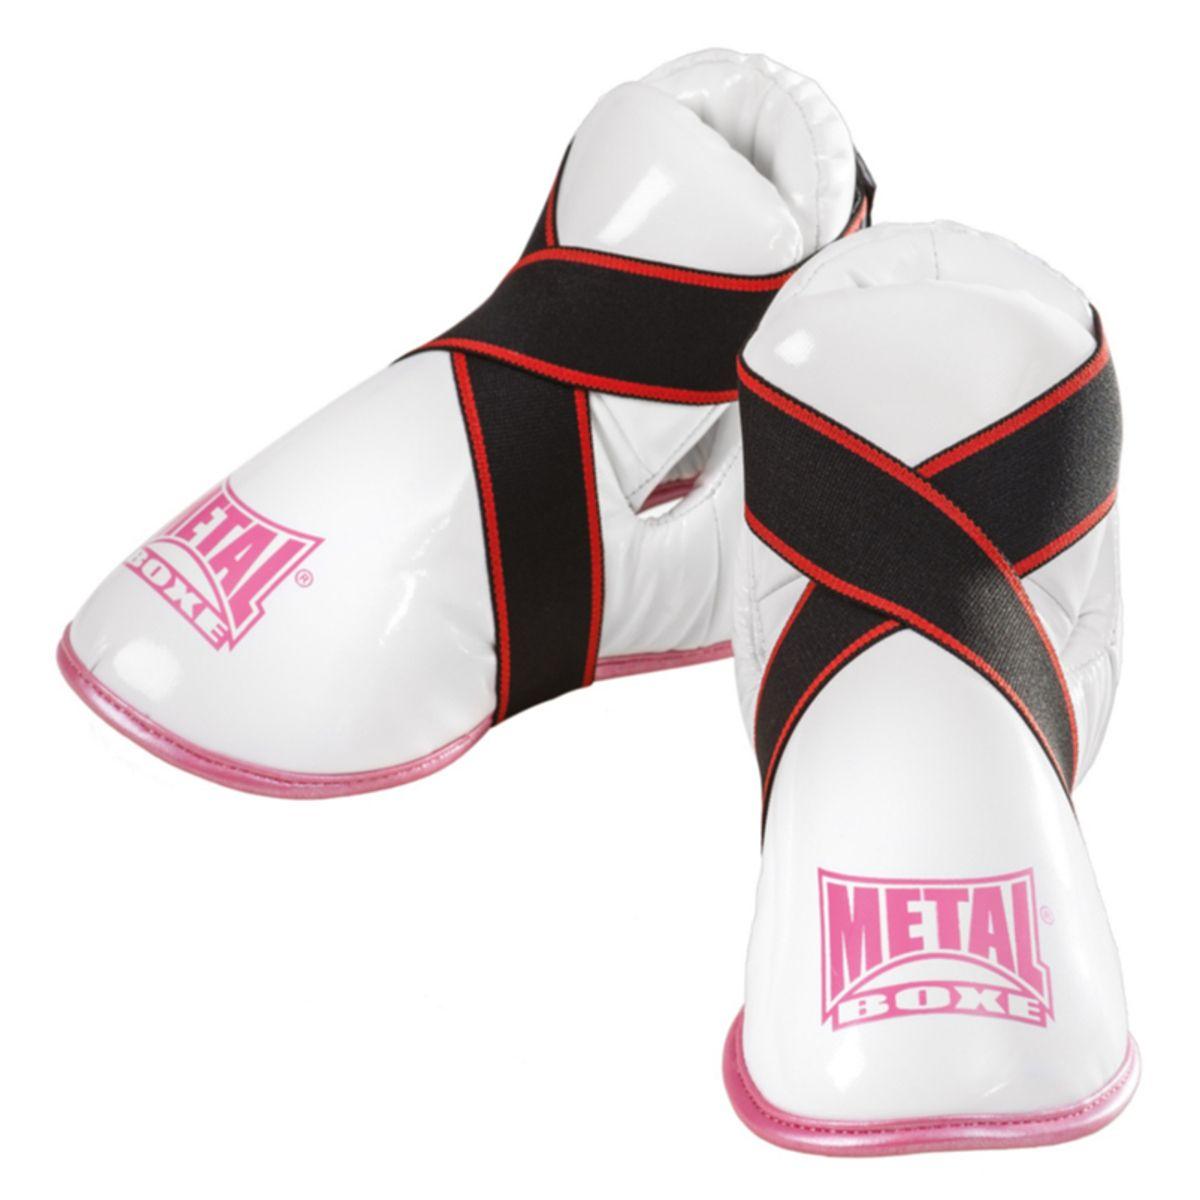 METAL BOXE Metal Boxe MULTIFIGHT - Chaussures boxe white - Private